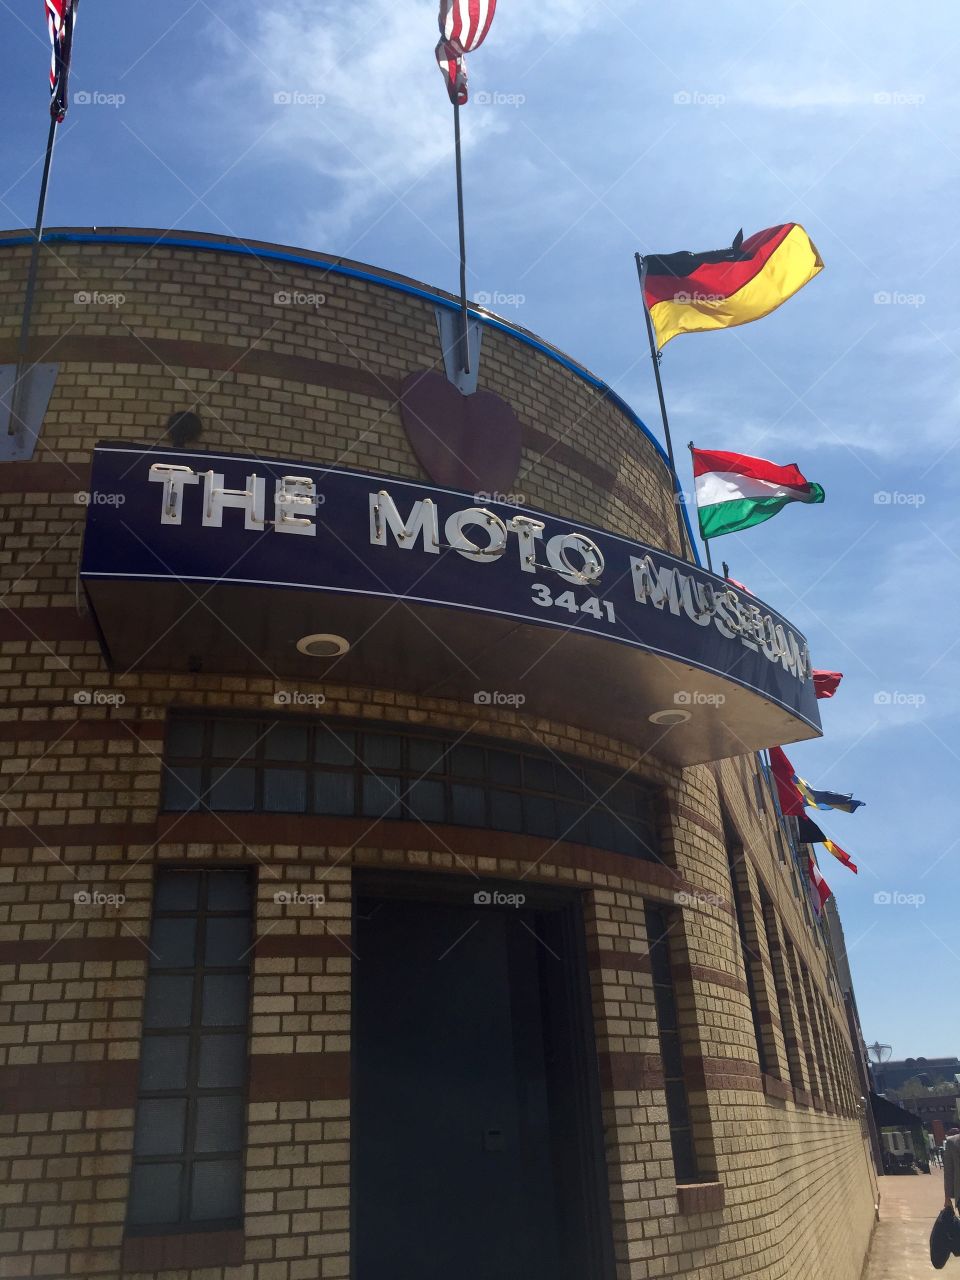 The Moto Museum. St. Louis, MO